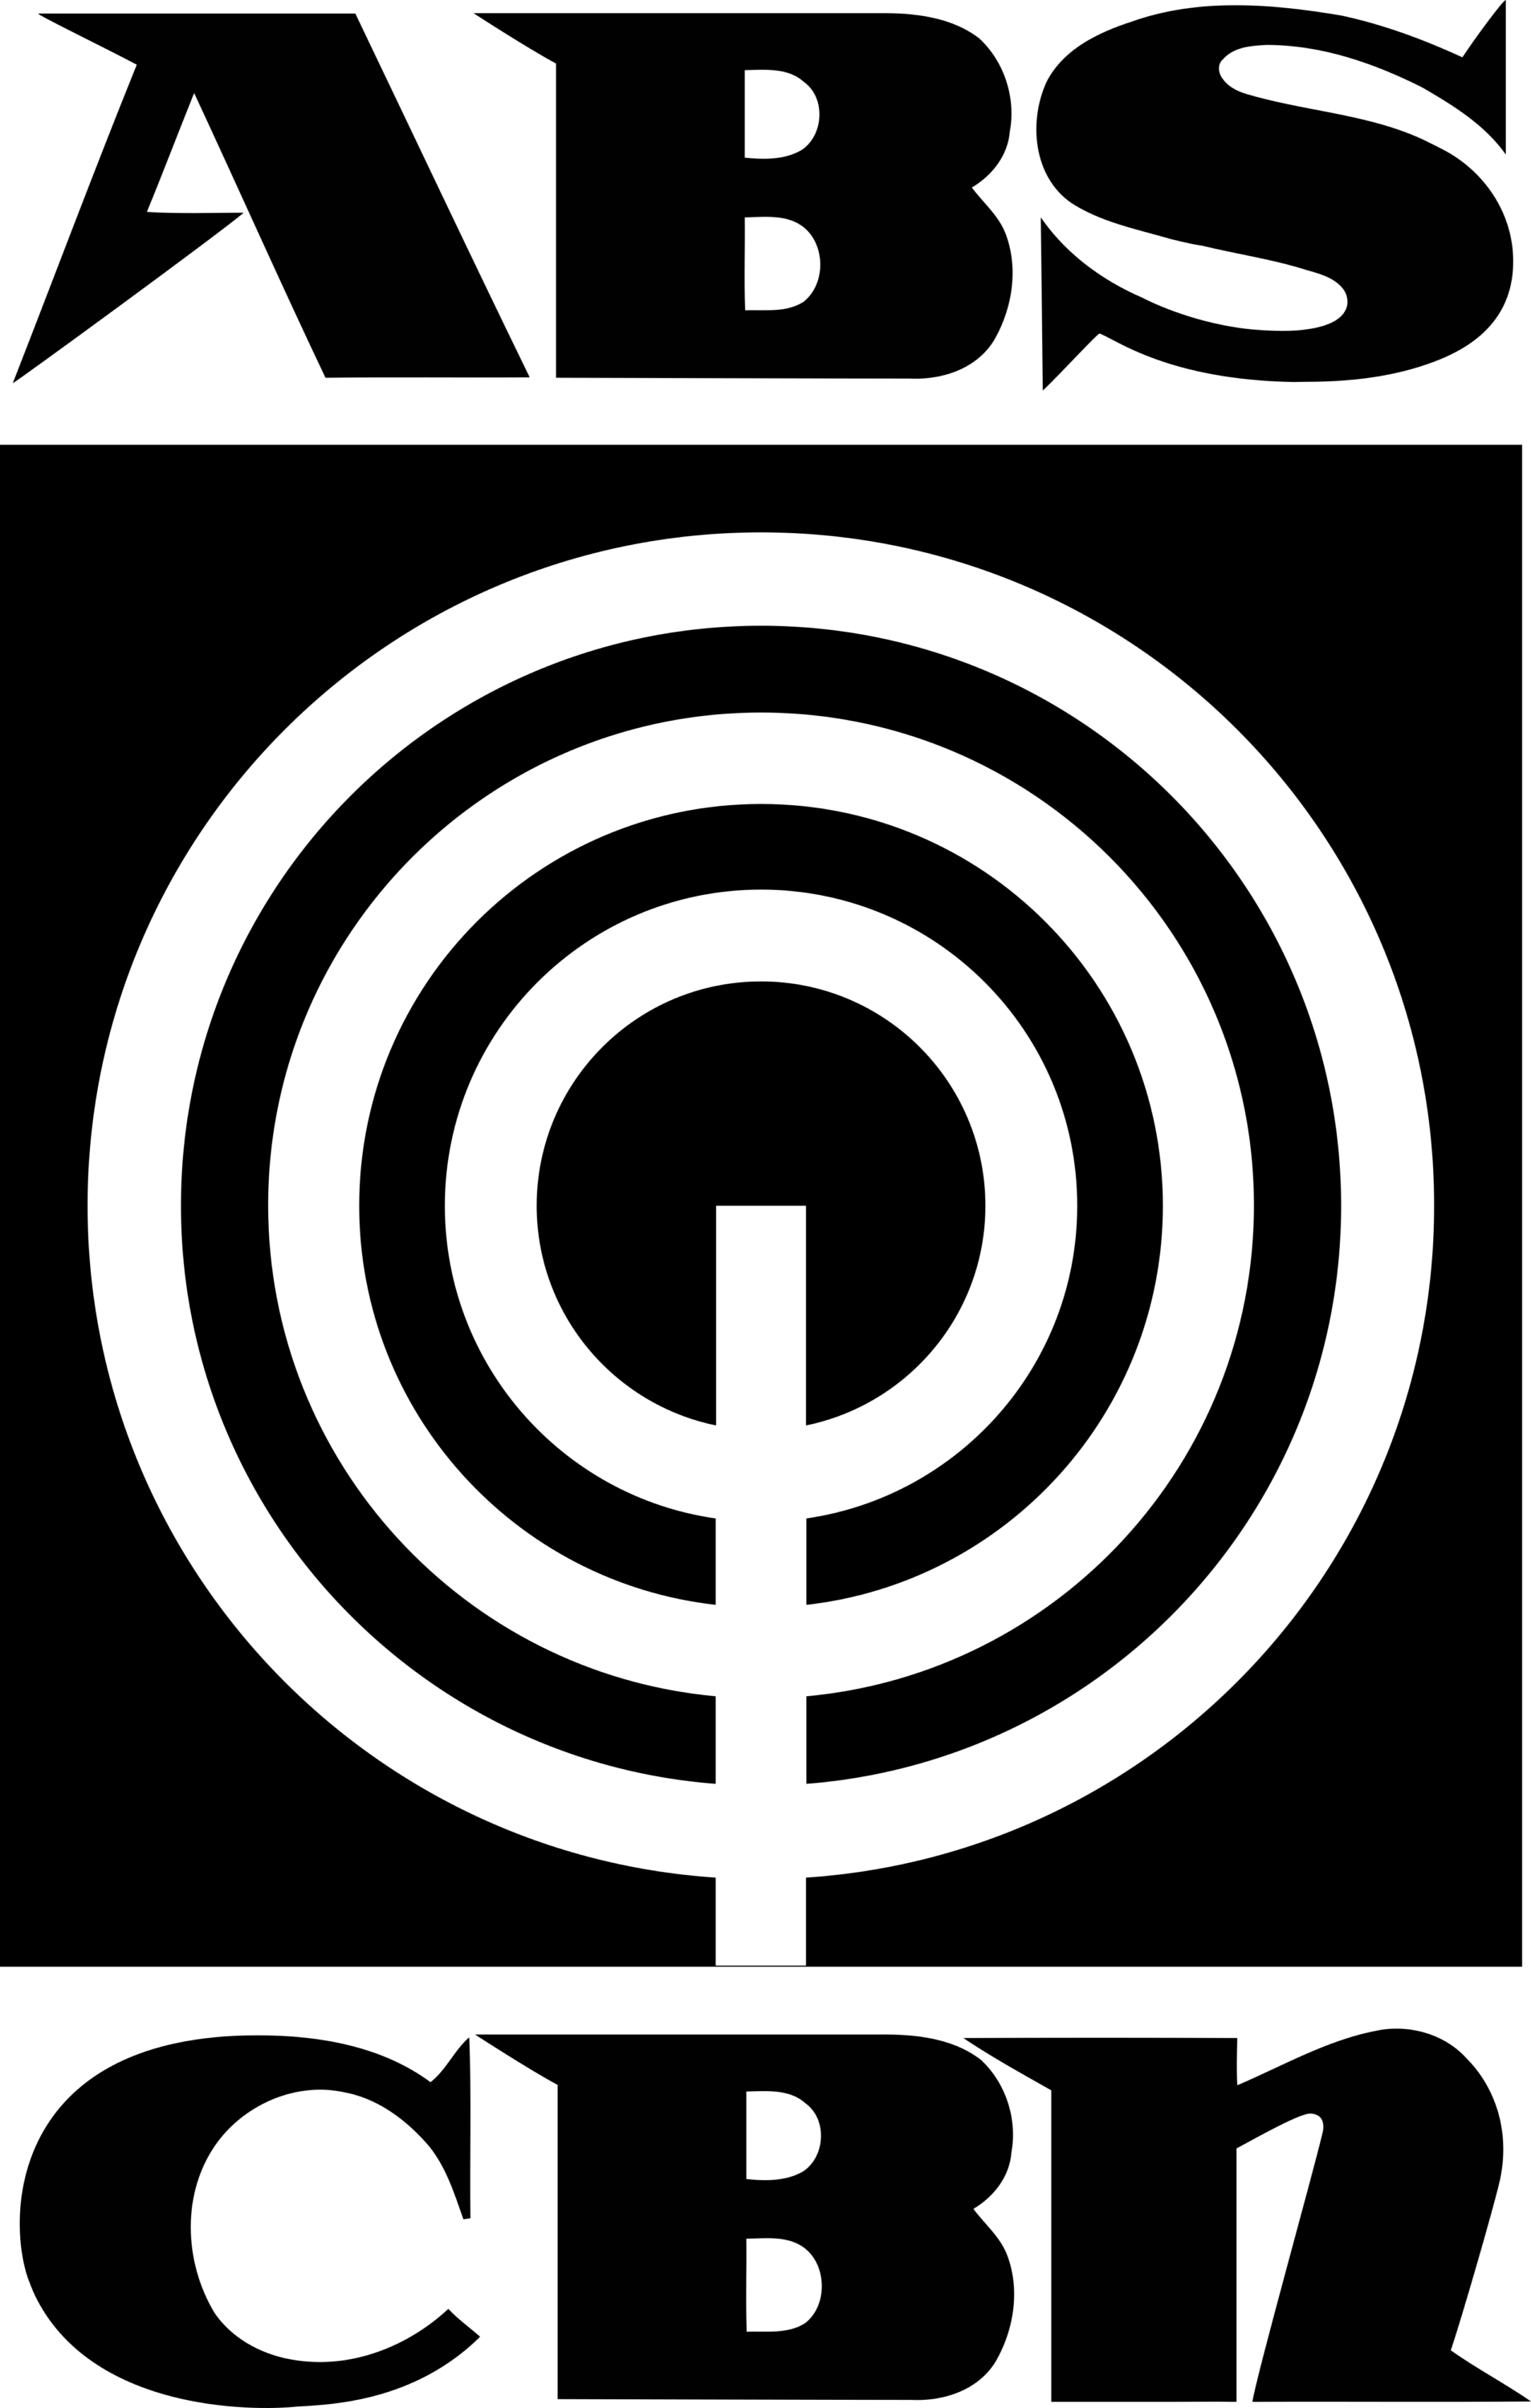 Alto Broadcasting System Chronicle Broadcasting Network (ABS CBN) Logo 1967